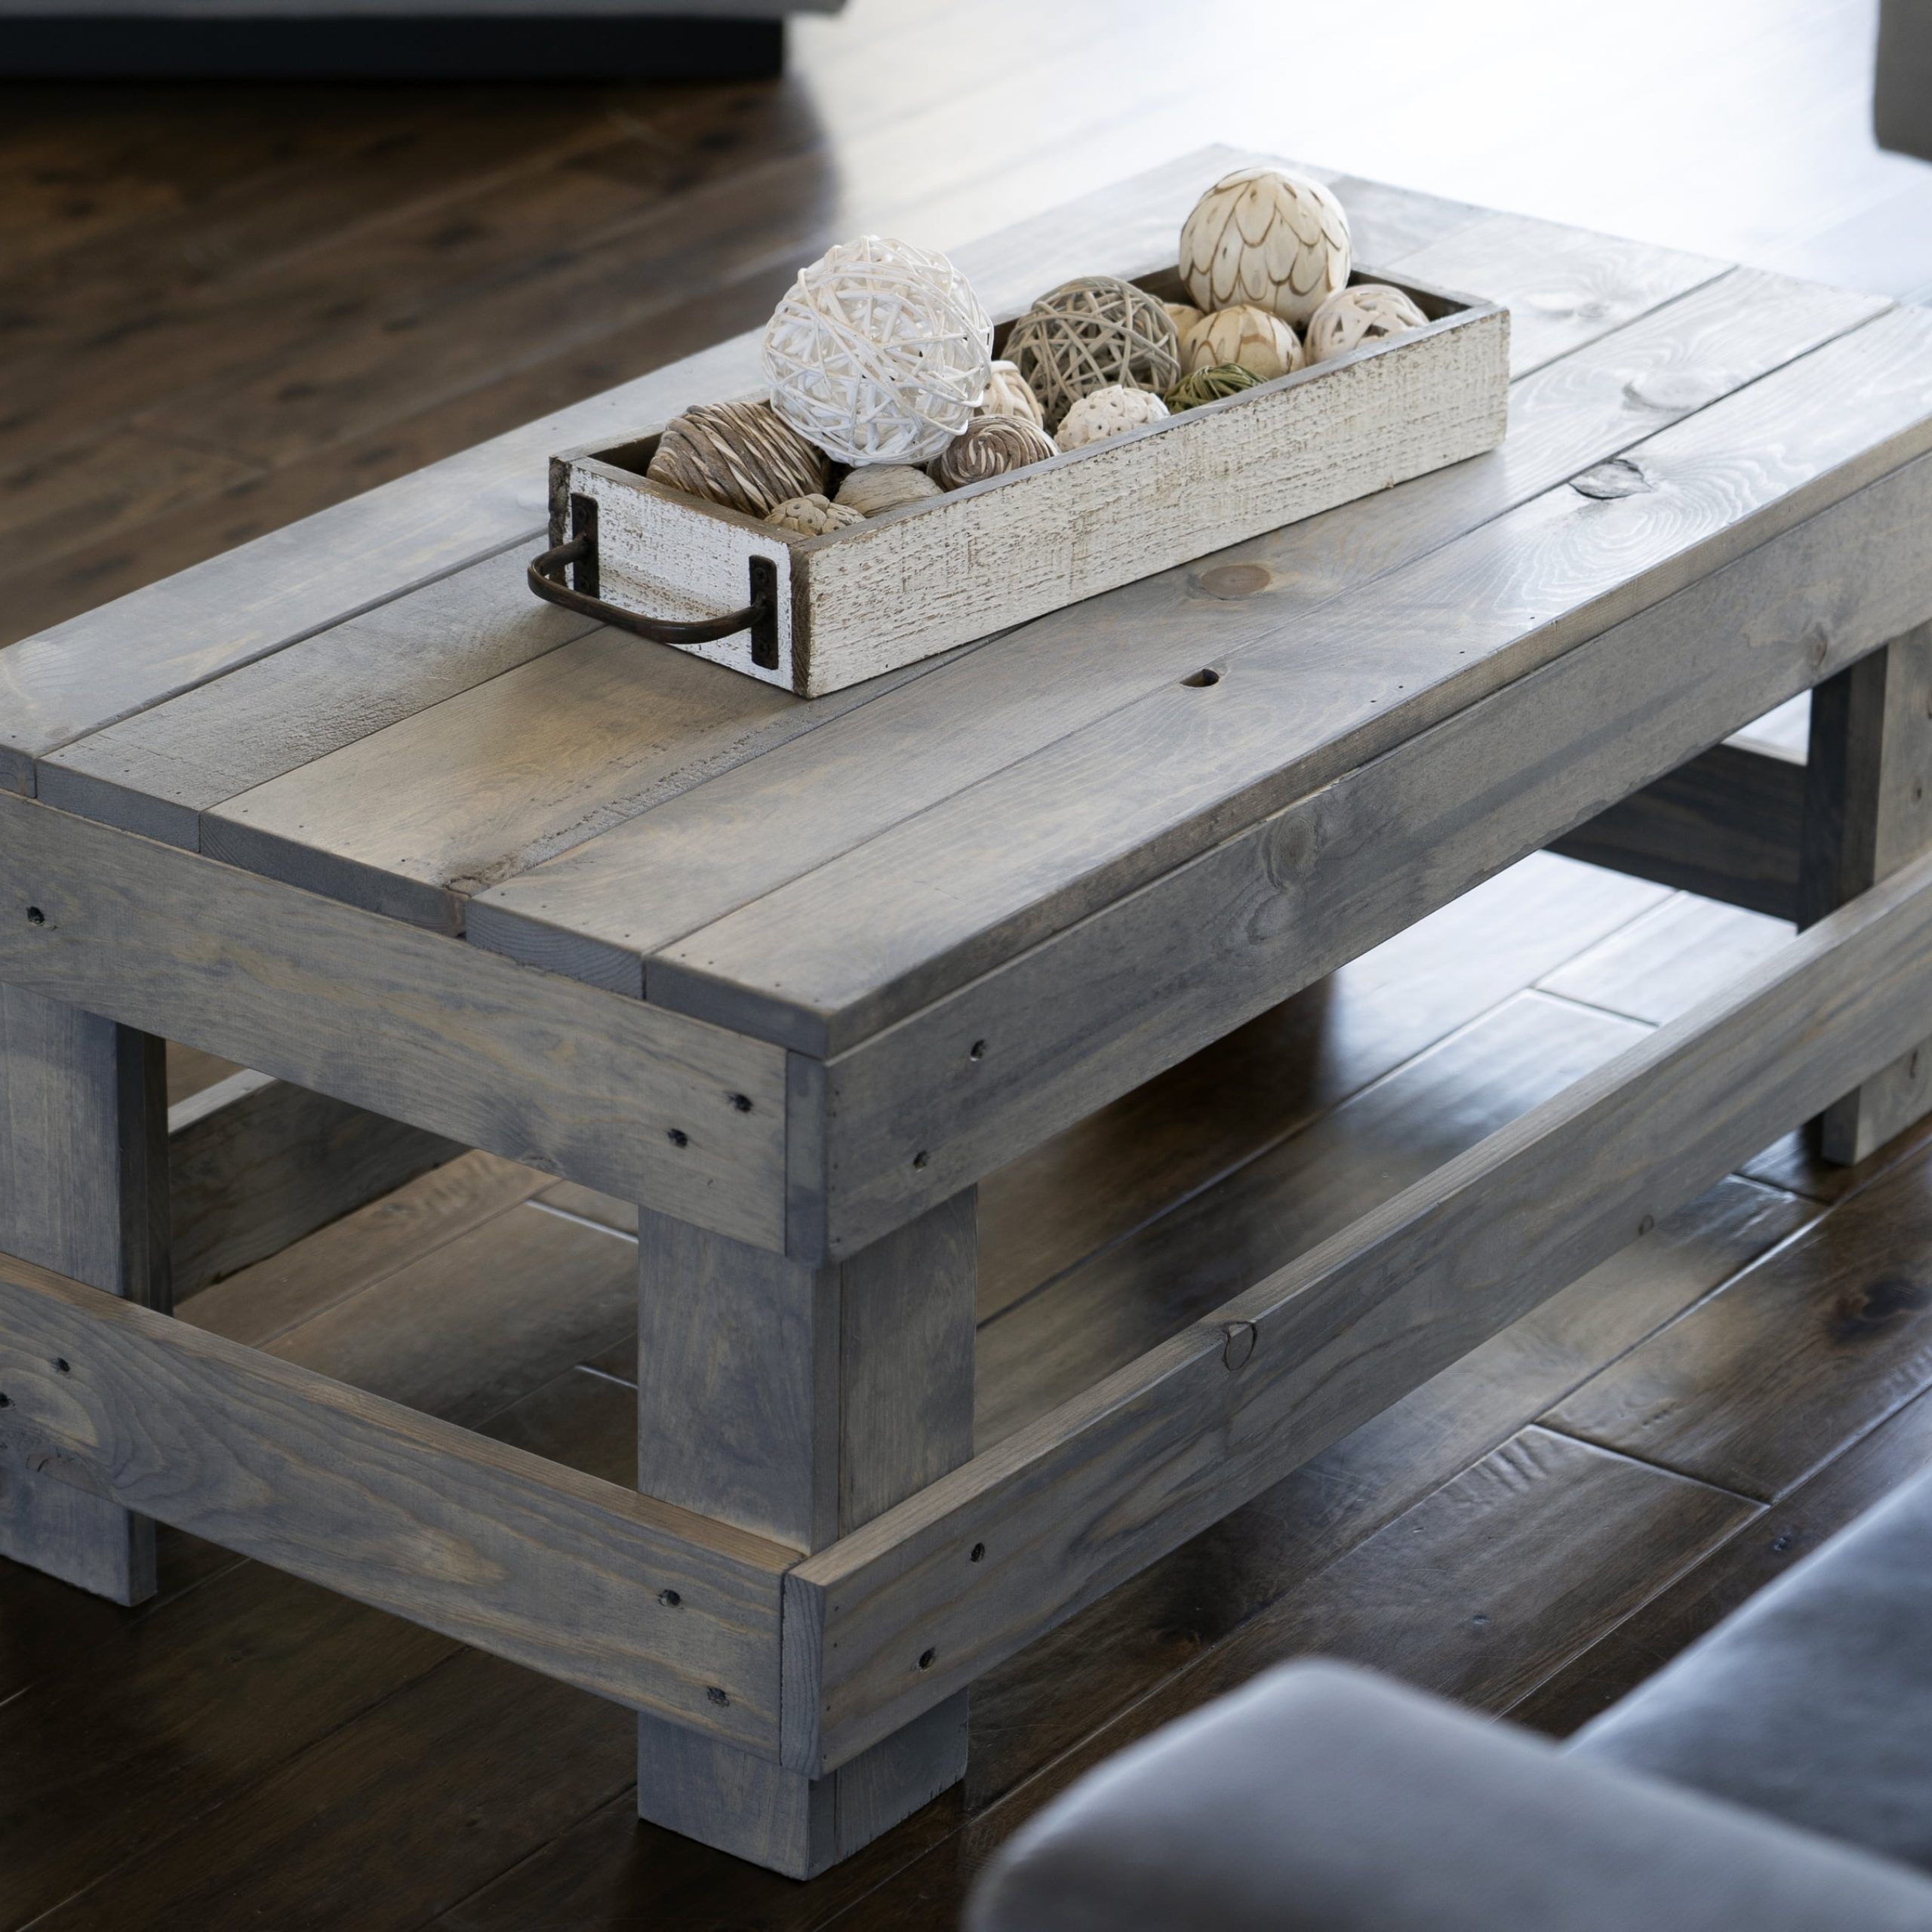 Buy Woven Paths Landmark Pine Solid Wood Farmhouse Coffee Table, Gray Inside Woven Paths Coffee Tables (Gallery 7 of 20)